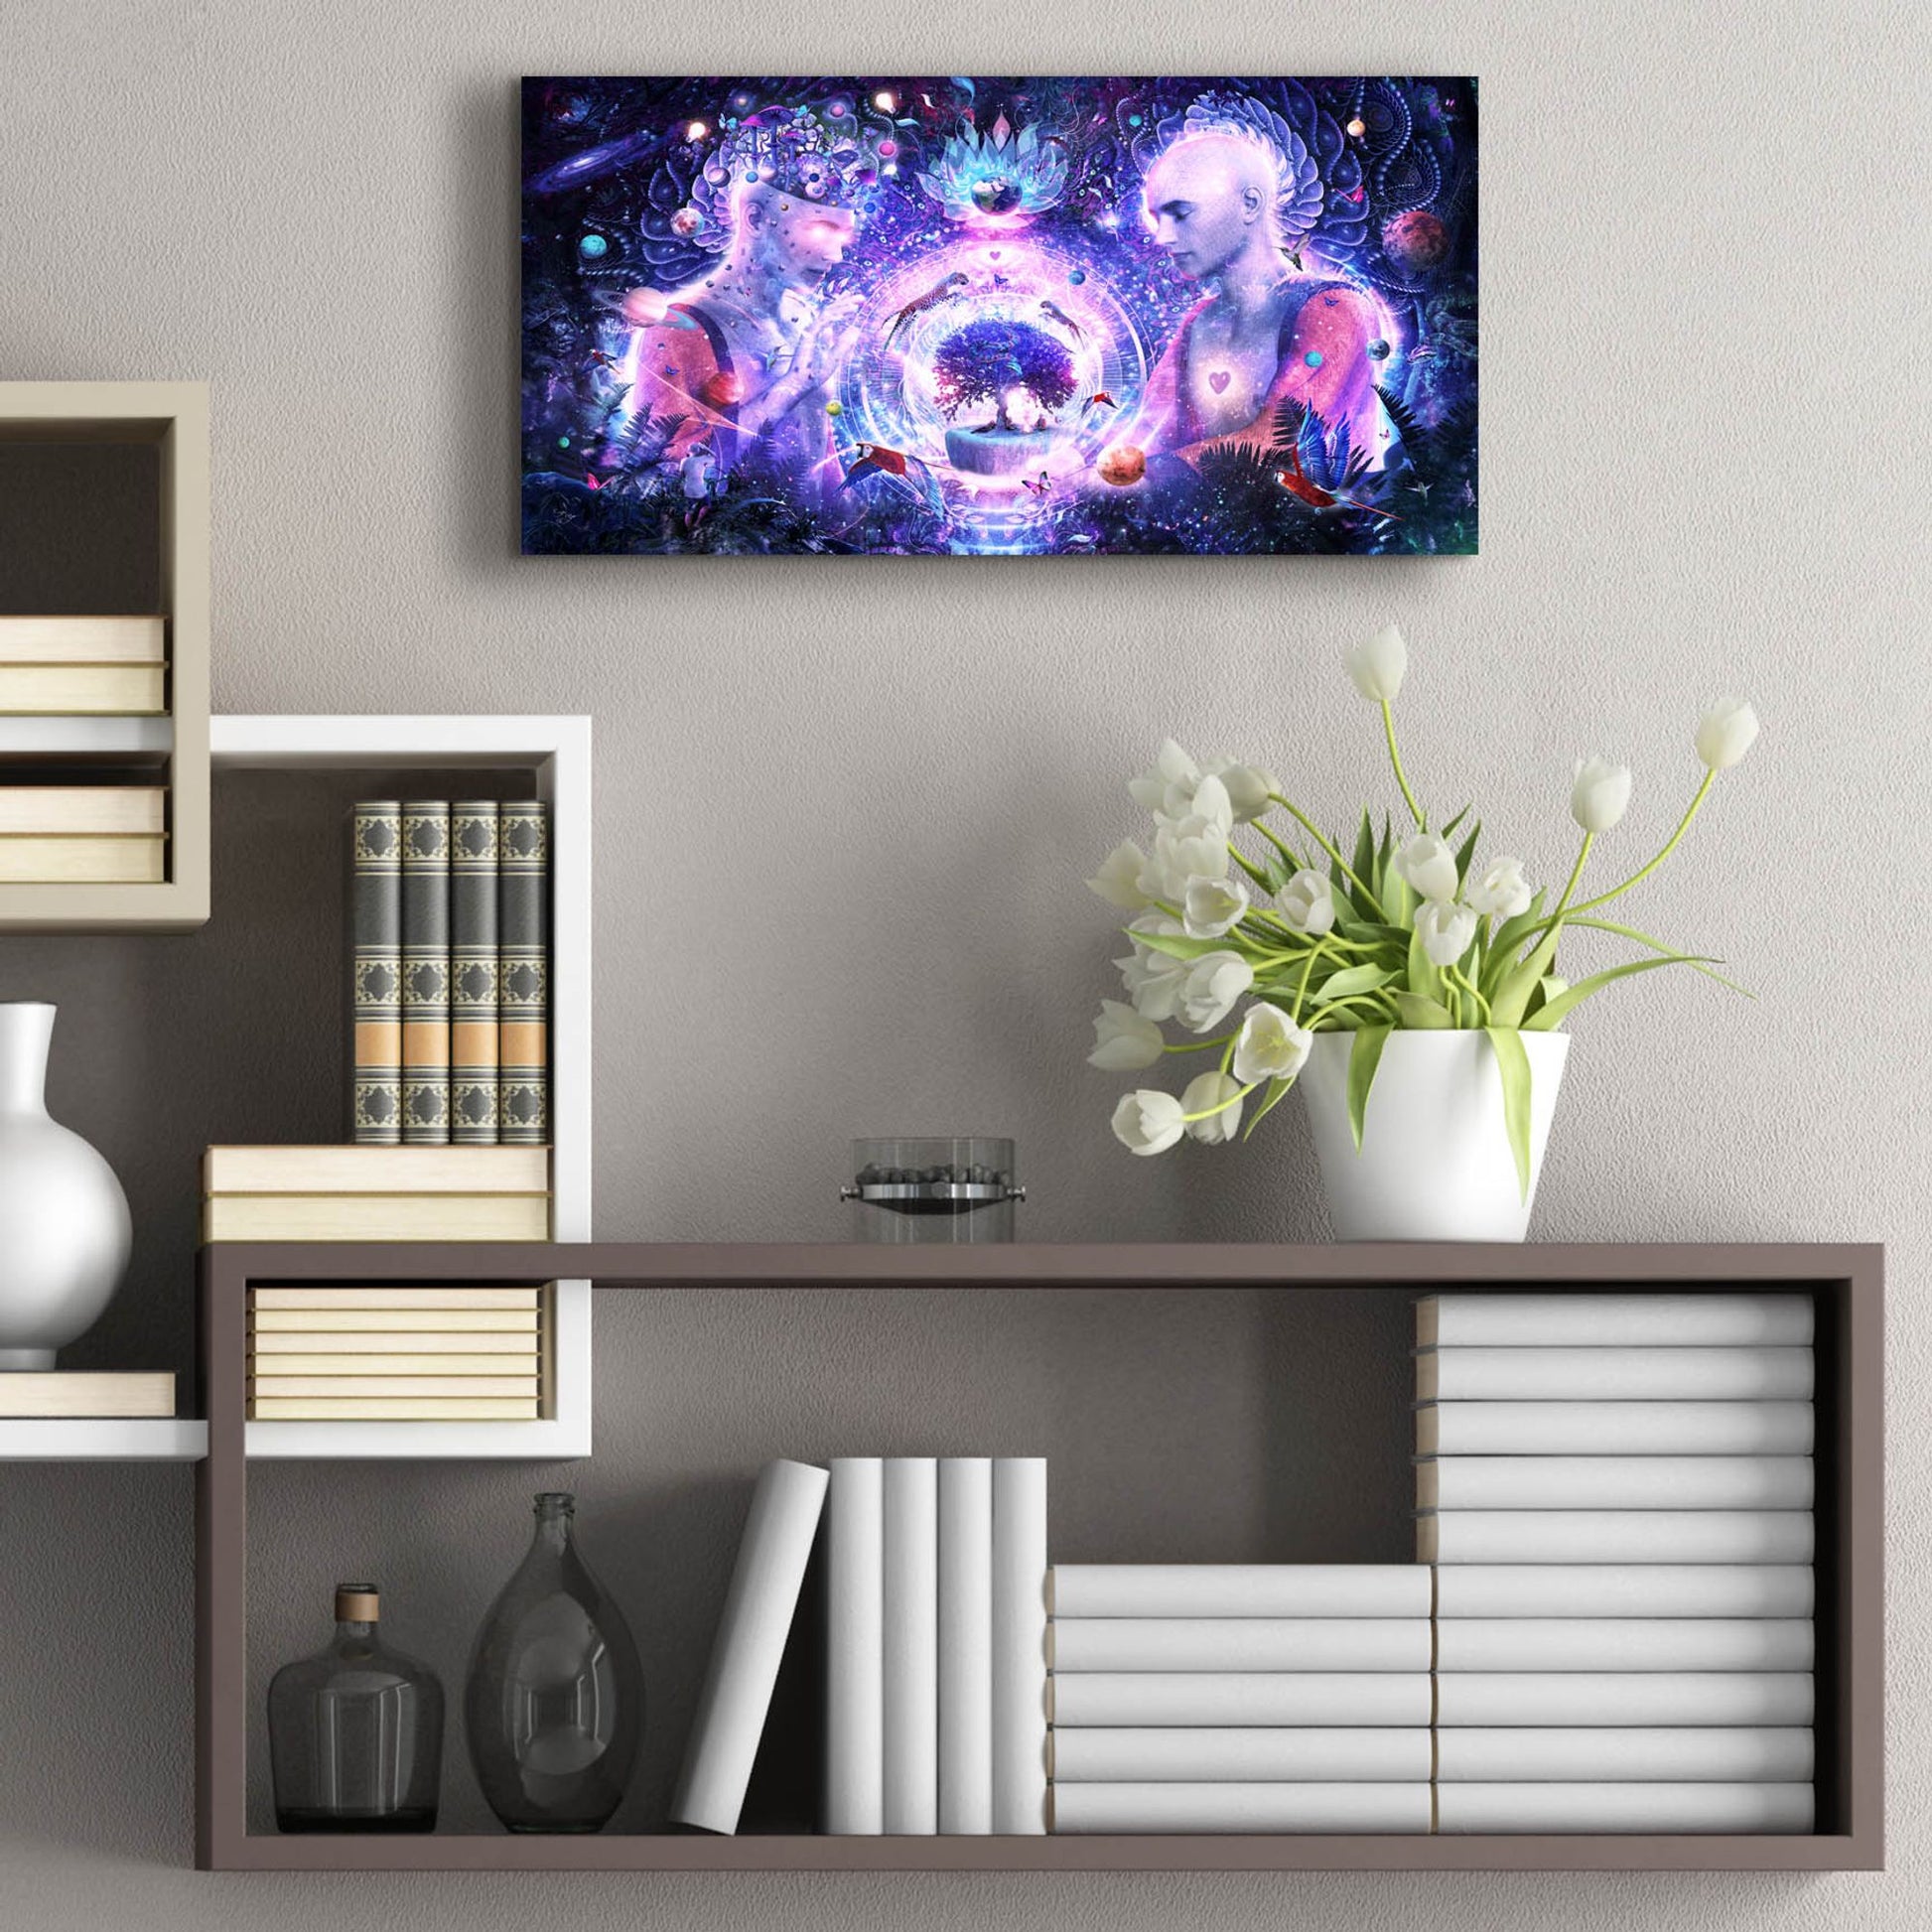 Epic Art 'A Spark In The Universe' by Cameron Gray, Acrylic Glass Wall Art,24x12